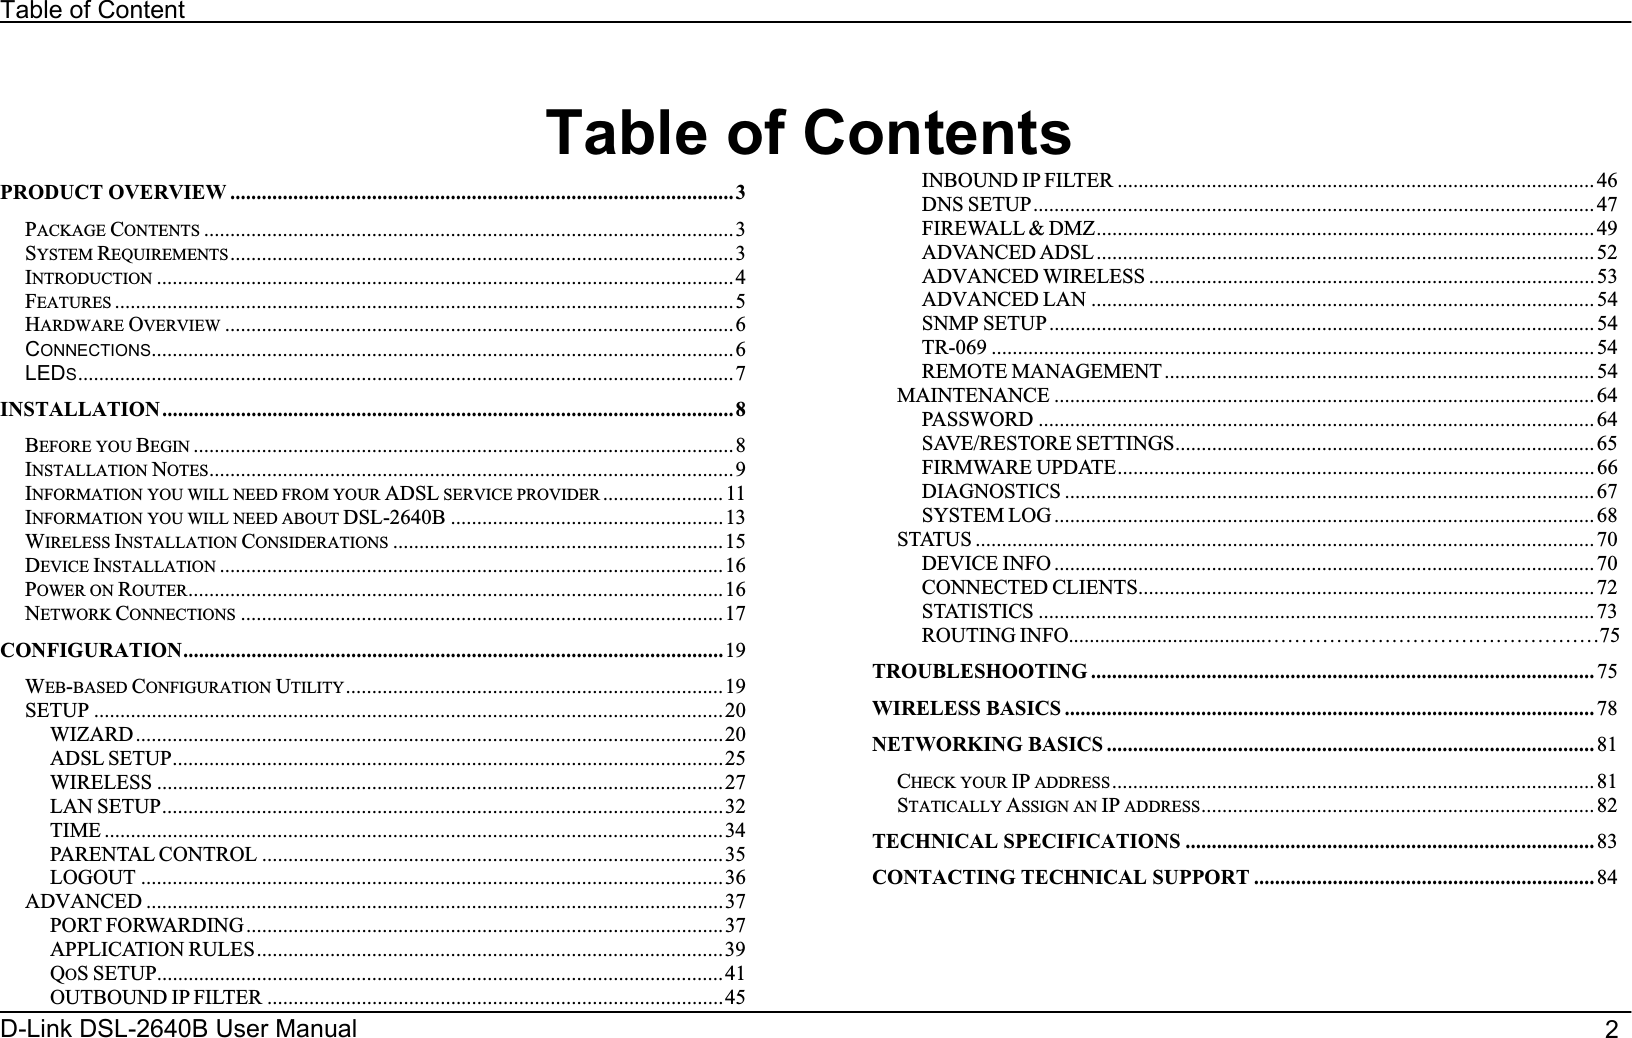 Table of Contenter                                    2D-Link DSL-2640B Us Manual   Table of ContentsPRODUCT OVERVIEW ................................................................................................3PACKAGE CONTENTS .....................................................................................................3SYSTEM REQUIREMENTS ................................................................................................3INTRODUCTION ..............................................................................................................4FEATURES ......................................................................................................................5HARDWARE OVERVIEW .................................................................................................6CONNECTIONS...............................................................................................................6LEDS.............................................................................................................................7INSTALLATION .............................................................................................................8BEFORE YOU BEGIN .......................................................................................................8INSTALLATION NOTES....................................................................................................9INFORMATION YOU WILL NEED FROM YOUR ADSL SERVICE PROVIDER ....................... 11INFORMATION YOU WILL NEED ABOUT DSL-2640B ....................................................13WIRELESS INSTALLATION CONSIDERATIONS ...............................................................15DEVICE INSTALLATION ................................................................................................16POWER ON ROUTER......................................................................................................16NETWORK CONNECTIONS ............................................................................................17CONFIGURATION.......................................................................................................19WEB-BASED CONFIGURATION UTILITY........................................................................19SETUP ........................................................................................................................20   WIZARD................................................................................................................20   ADSL SETUP.........................................................................................................25   WIRELESS ............................................................................................................27   LAN SETUP...........................................................................................................32   TIME ......................................................................................................................34   PARENTAL CONTROL ........................................................................................35   LOGOUT ...............................................................................................................36ADVANCED ..............................................................................................................37   PORT FORWARDING...........................................................................................37   APPLICATION RULES.........................................................................................39   QOS SETUP............................................................................................................41   OUTBOUND IP FILTER .......................................................................................45   INBOUND IP FILTER ...........................................................................................46   DNS SETUP........................................................................................................... 47   FIREWALL &amp; DMZ............................................................................................... 49   ADVANCED ADSL............................................................................................... 52   ADVANCED WIRELESS ..................................................................................... 53   ADVANCED LAN ................................................................................................ 54   SNMP SETUP ........................................................................................................ 54   TR-069 ................................................................................................................... 54   REMOTE MANAGEMENT .................................................................................. 54MAINTENANCE ....................................................................................................... 64   PASSWORD ..........................................................................................................64   SAVE/RESTORE SETTINGS................................................................................65   FIRMWARE UPDATE...........................................................................................66   DIAGNOSTICS .....................................................................................................67   SYSTEM LOG ....................................................................................................... 68STATUS ...................................................................................................................... 70   DEVICE INFO .......................................................................................................70   CONNECTED CLIENTS.......................................................................................72   STATISTICS .......................................................................................................... 73   ROUTING INFO......................................…………………………………………75TROUBLESHOOTING ................................................................................................ 75WIRELESS BASICS ..................................................................................................... 78NETWORKING BASICS ............................................................................................. 81CHECK YOUR IP ADDRESS............................................................................................ 81STATICALLY ASSIGN AN IP ADDRESS........................................................................... 82TECHNICAL SPECIFICATIONS .............................................................................. 83CONTACTING TECHNICAL SUPPORT ................................................................. 84